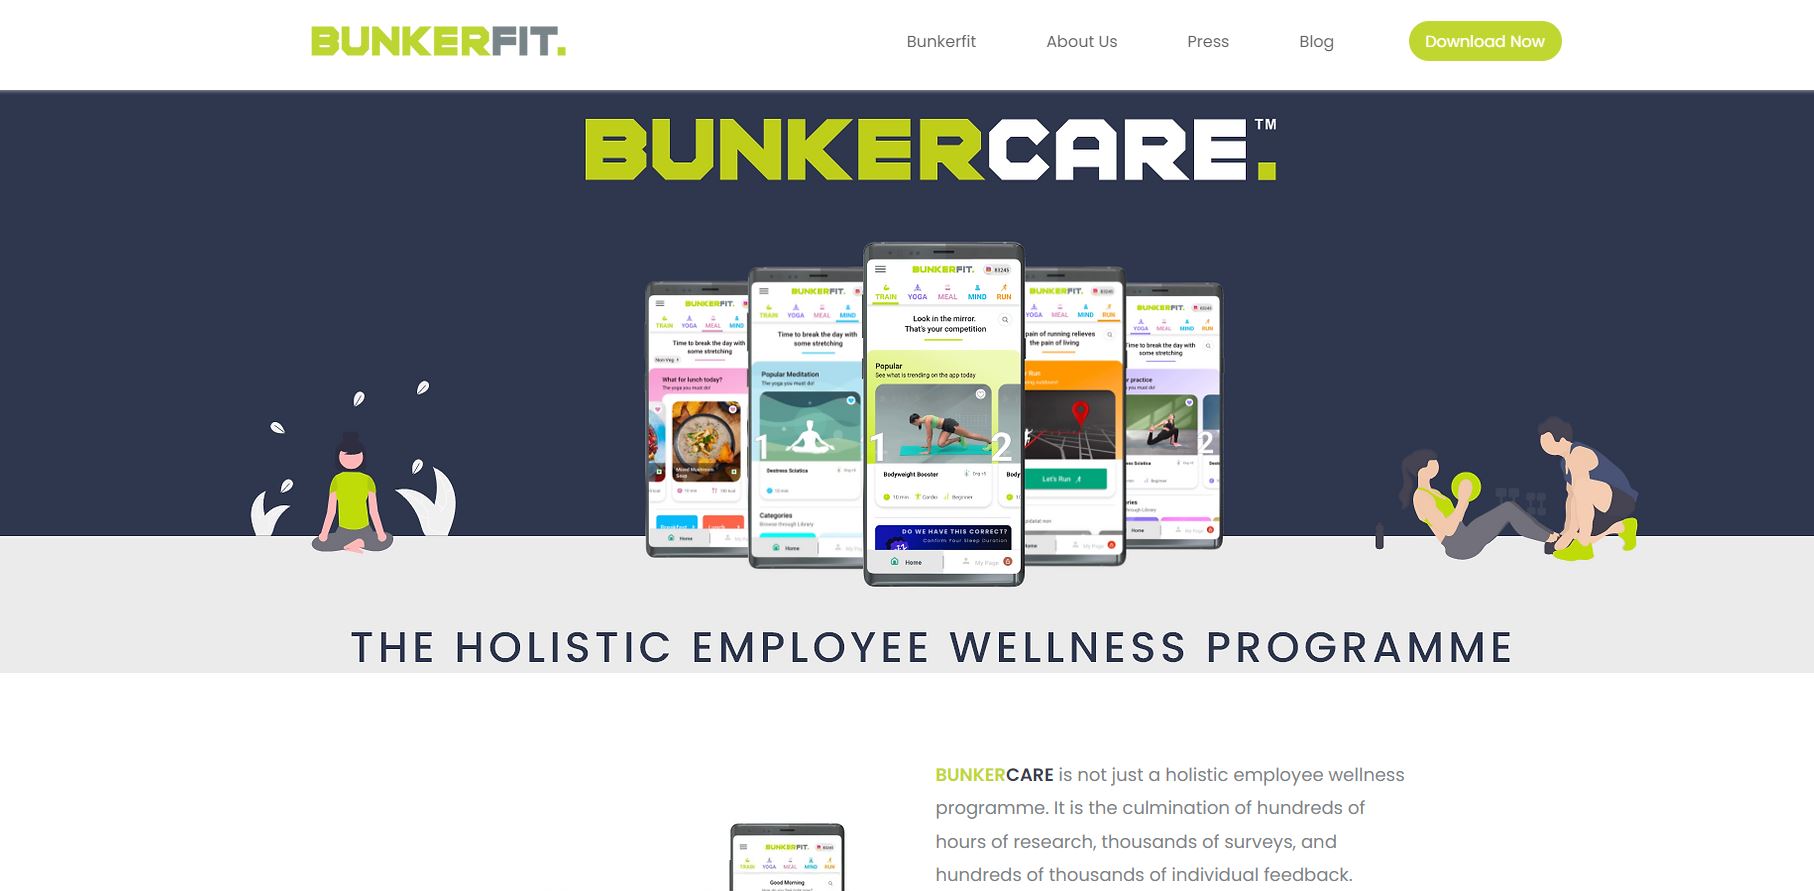 BunkerFit, the health, wellness, and fitness startup is backed by an impressive $1.9 million investment from Rainmatter